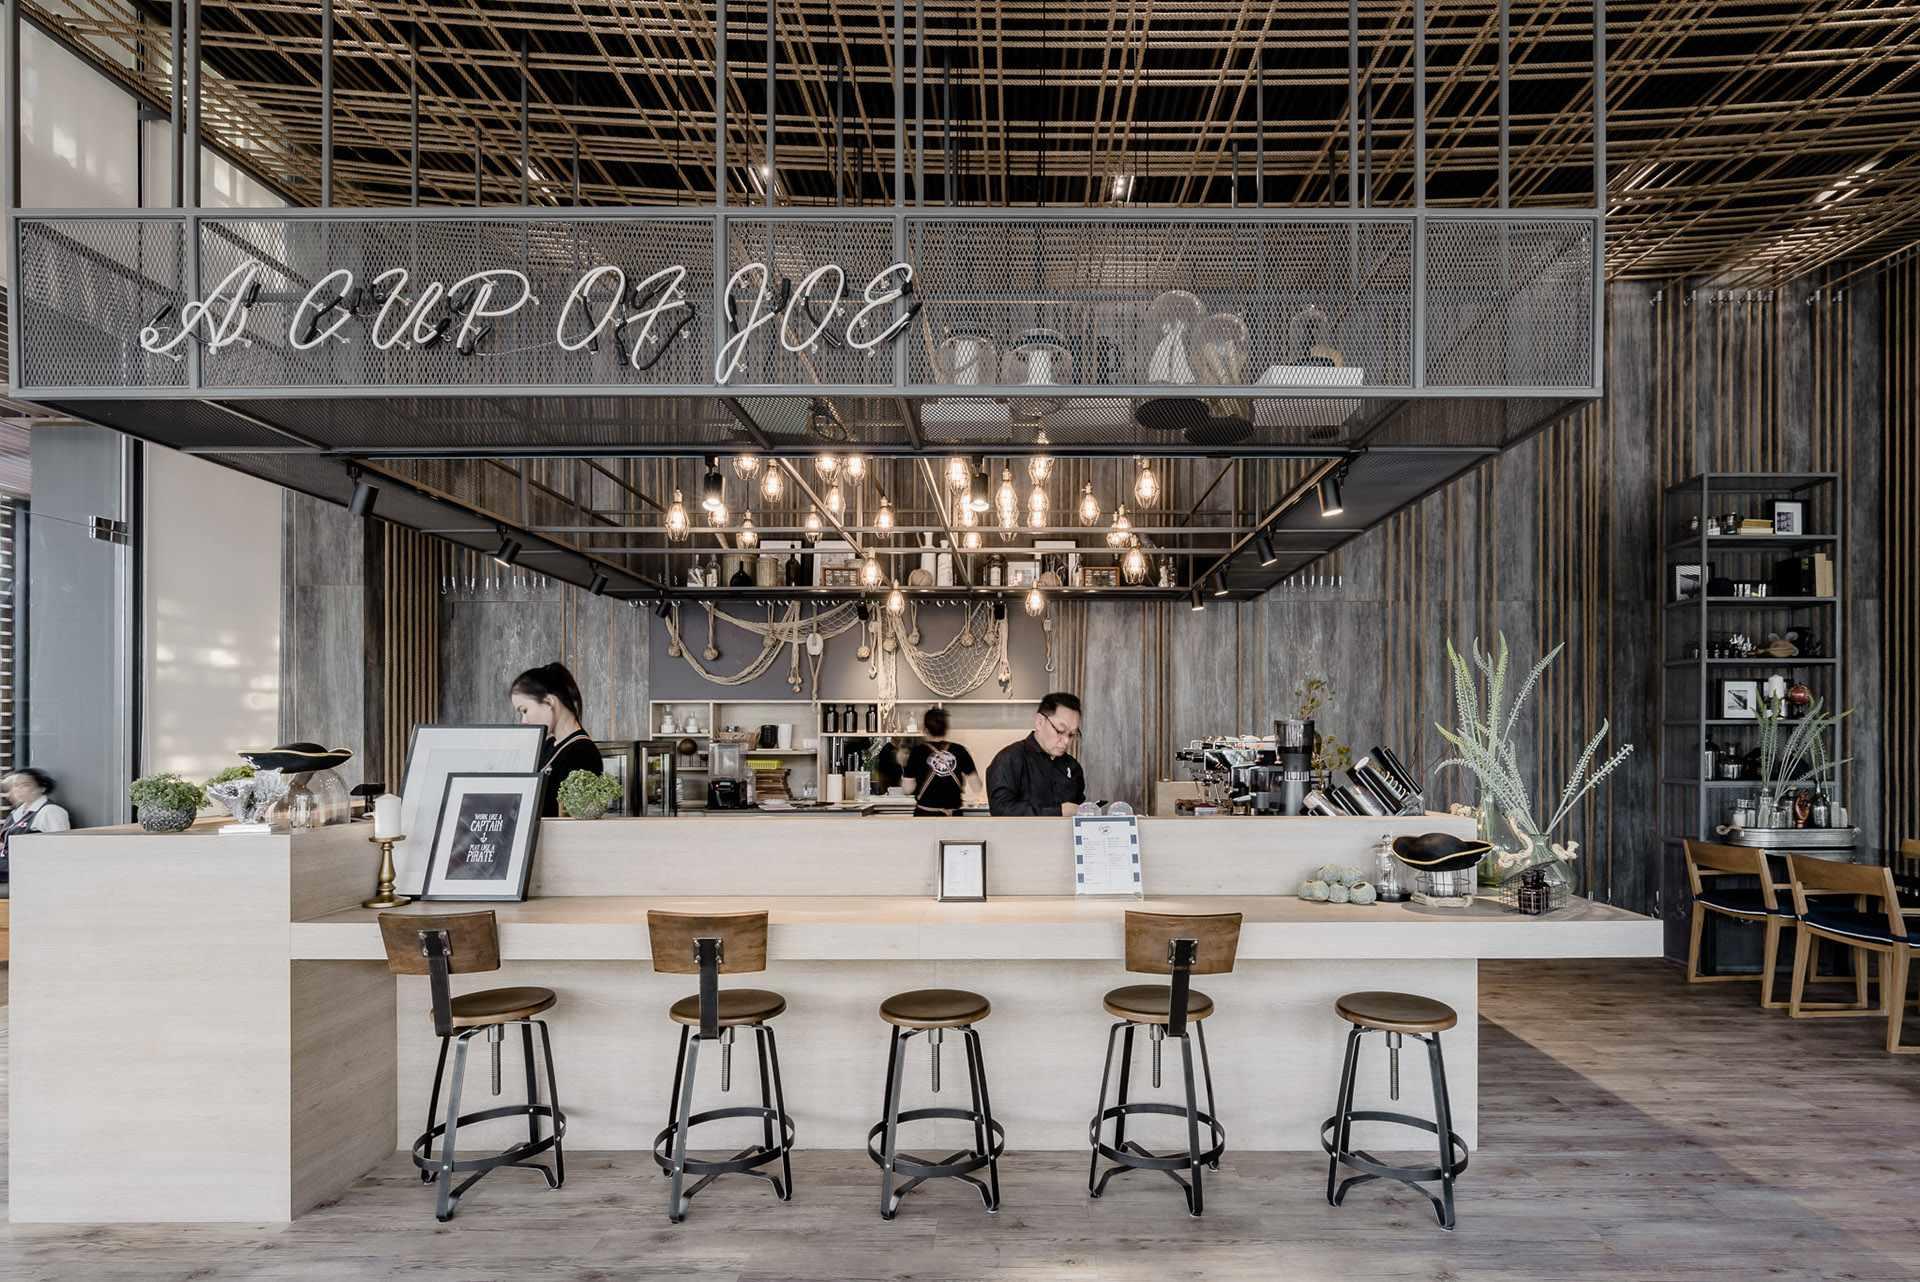 Cafe Counter Bar | Coffee Shop Design Layout Factory